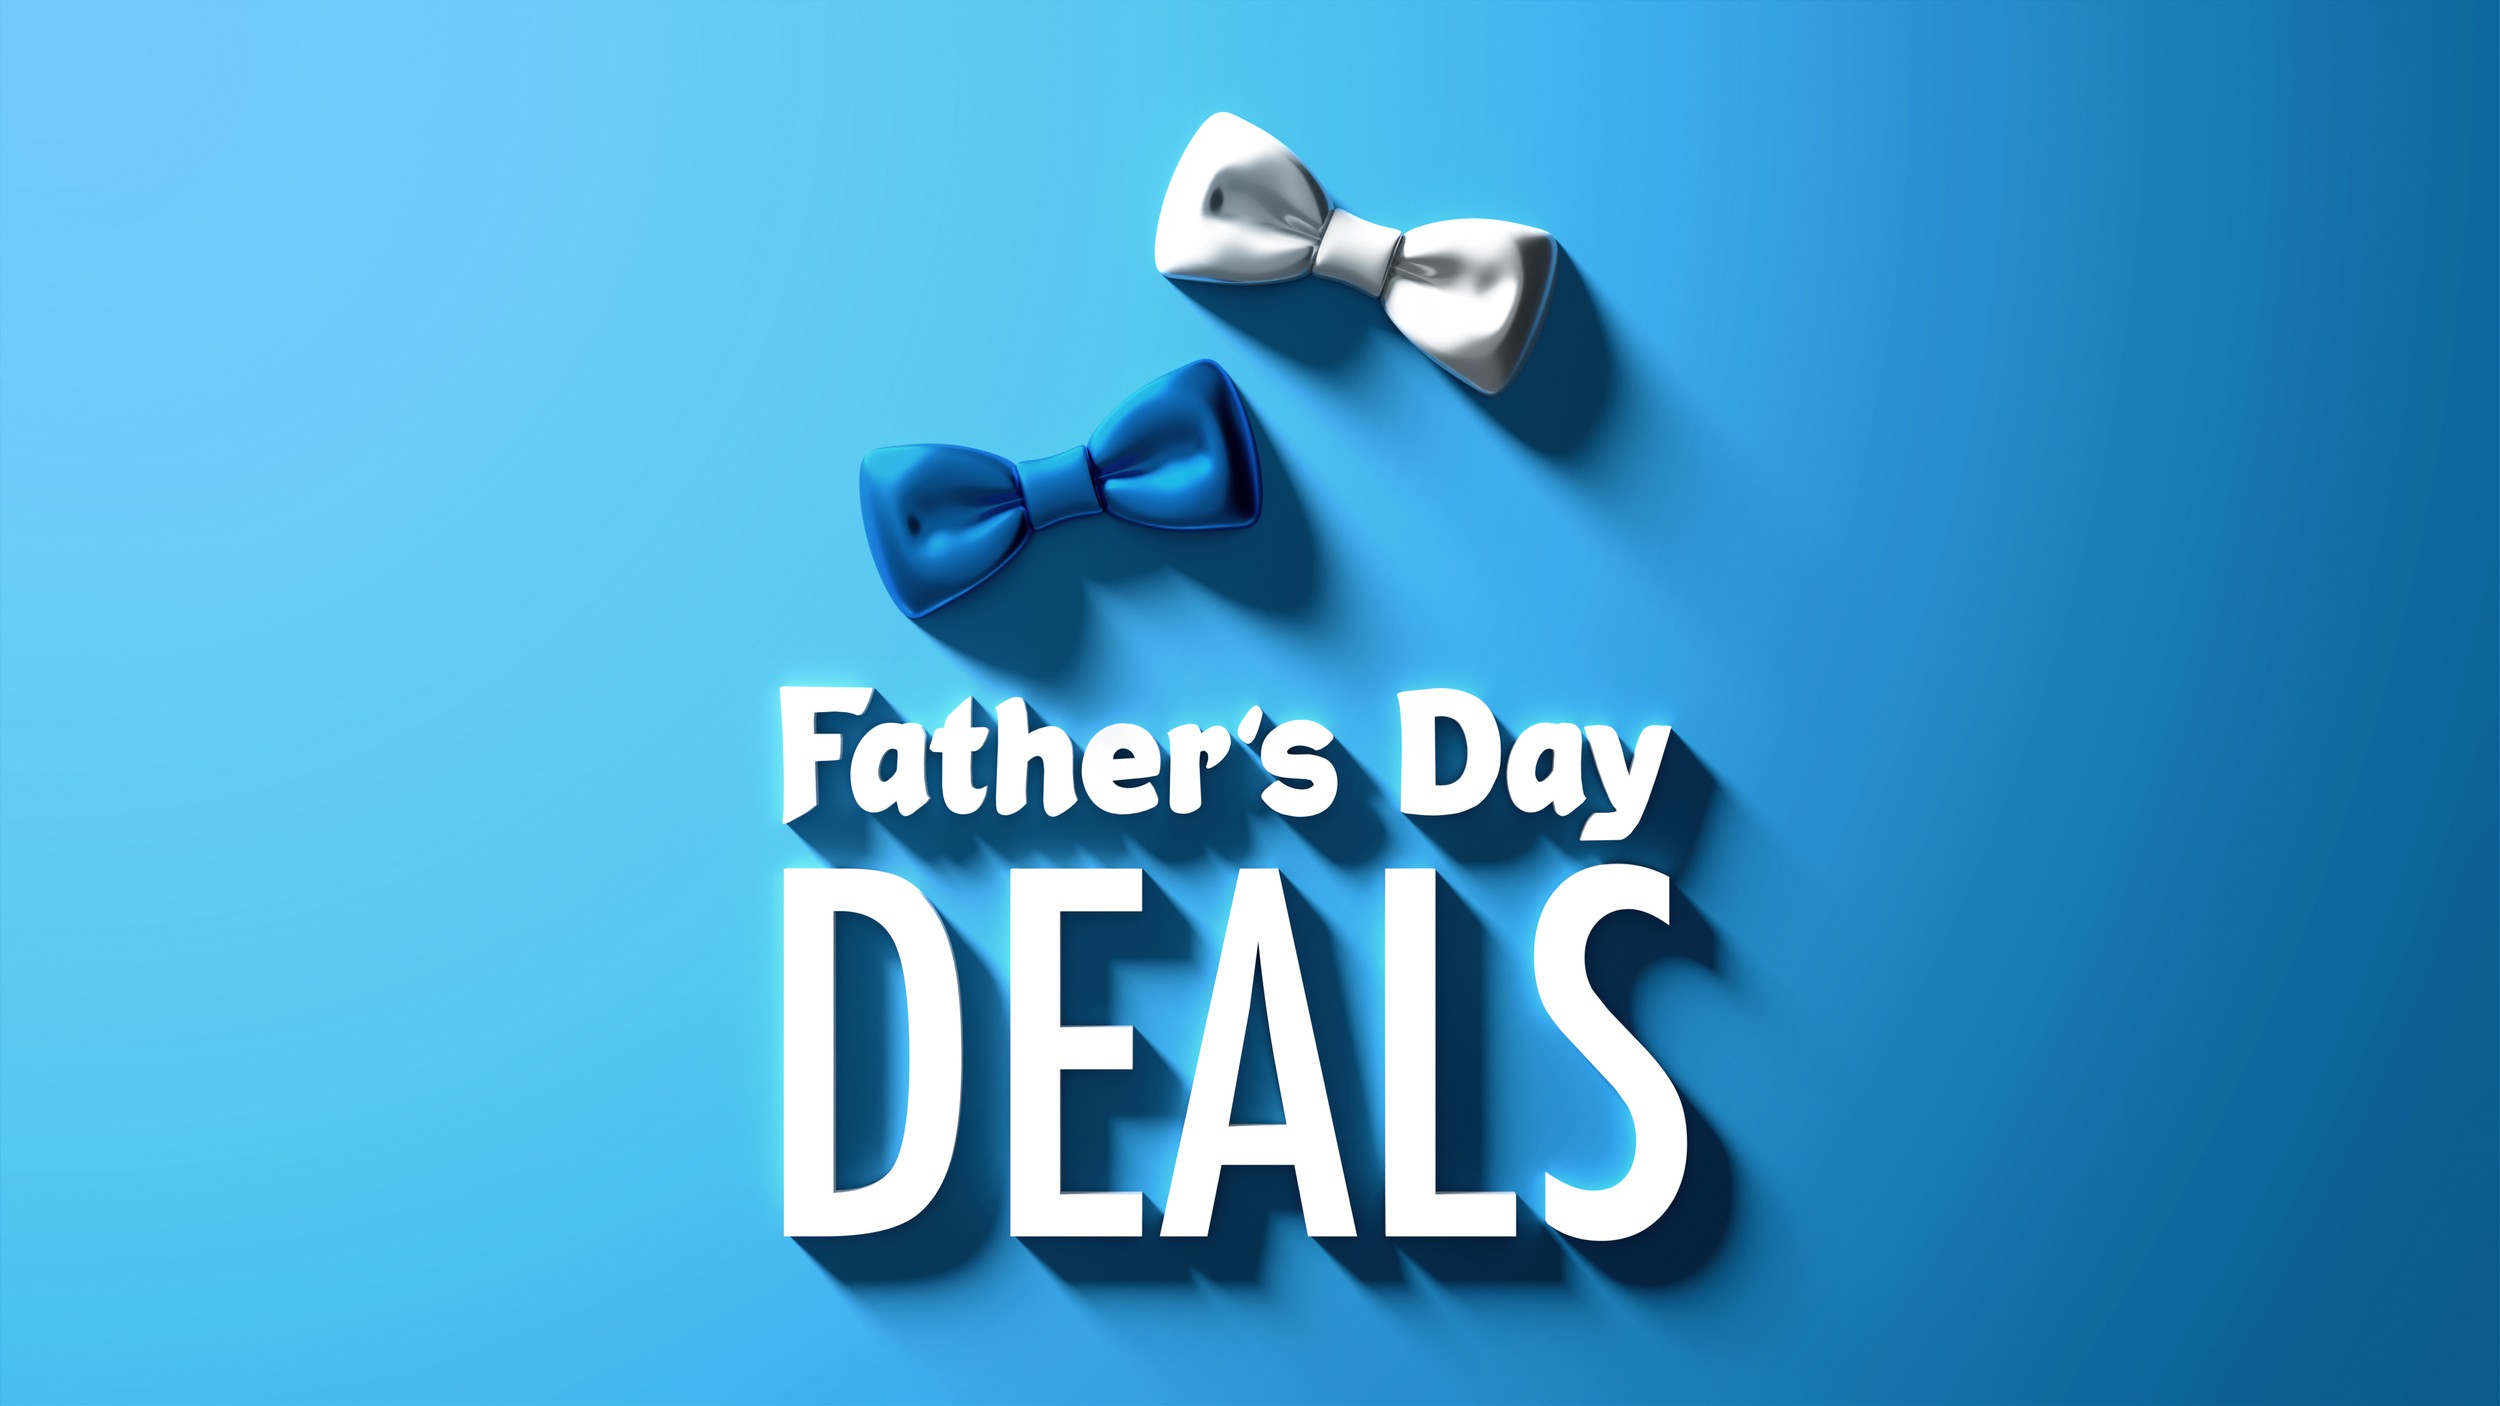 Father's Day Deals Offer Discounts on Smart Home Accessories